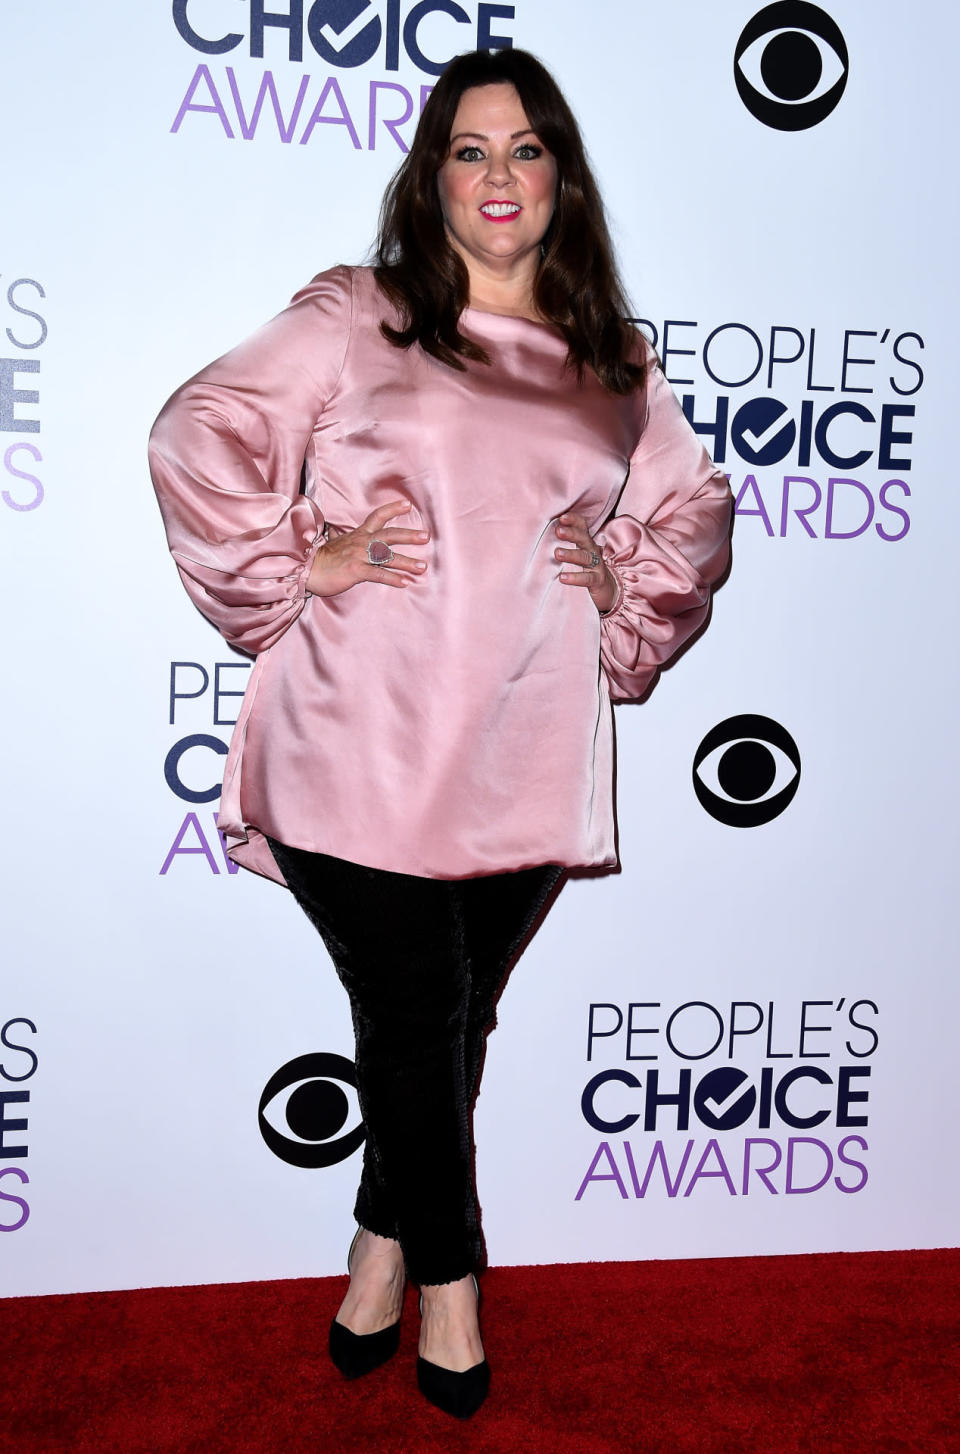 Melissa McCarthy tried the bell sleeve trend on for size at the 2016 People’s Choice Awards